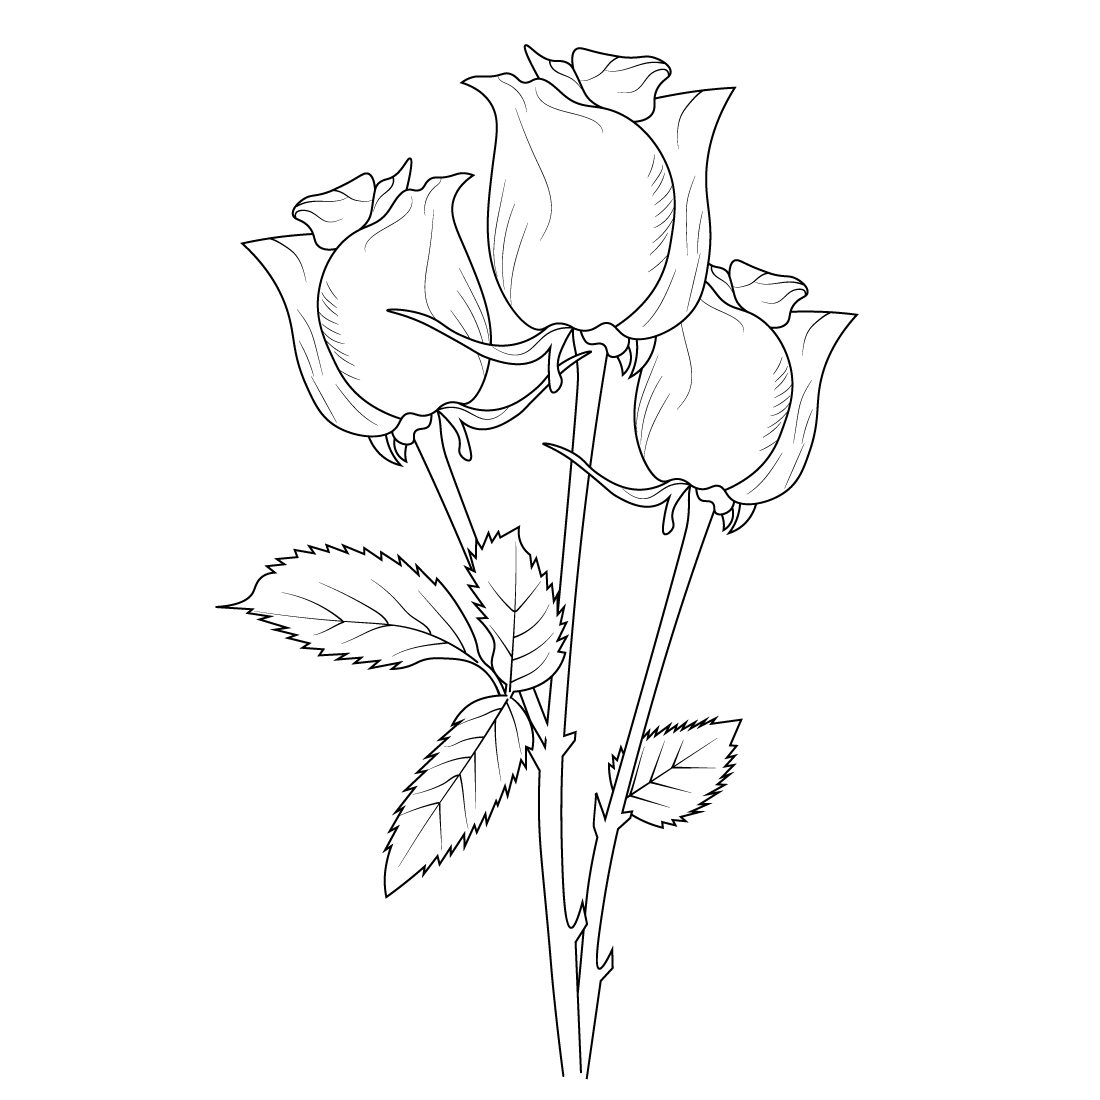 How to Draw a Rose – Easy Step by Step For Beginners and Kids#beginners # draw #easy #kids #ro… | Easy drawings for beginners, Easy drawings for kids,  Flower drawing